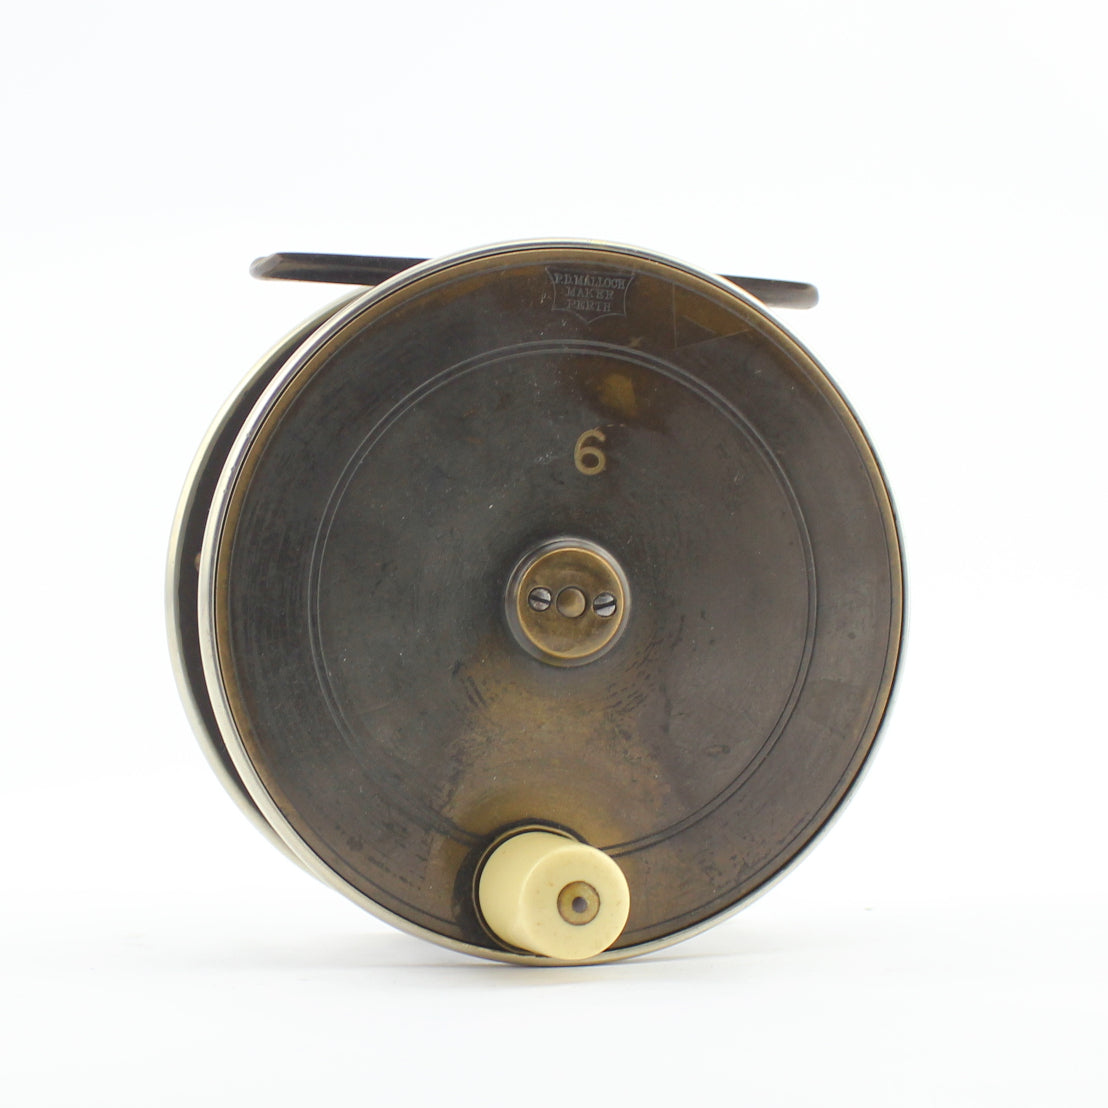 A Rare P.D. Malloch Of Perth Number 9 Patent Brake All Brass Salmon Fly Reel